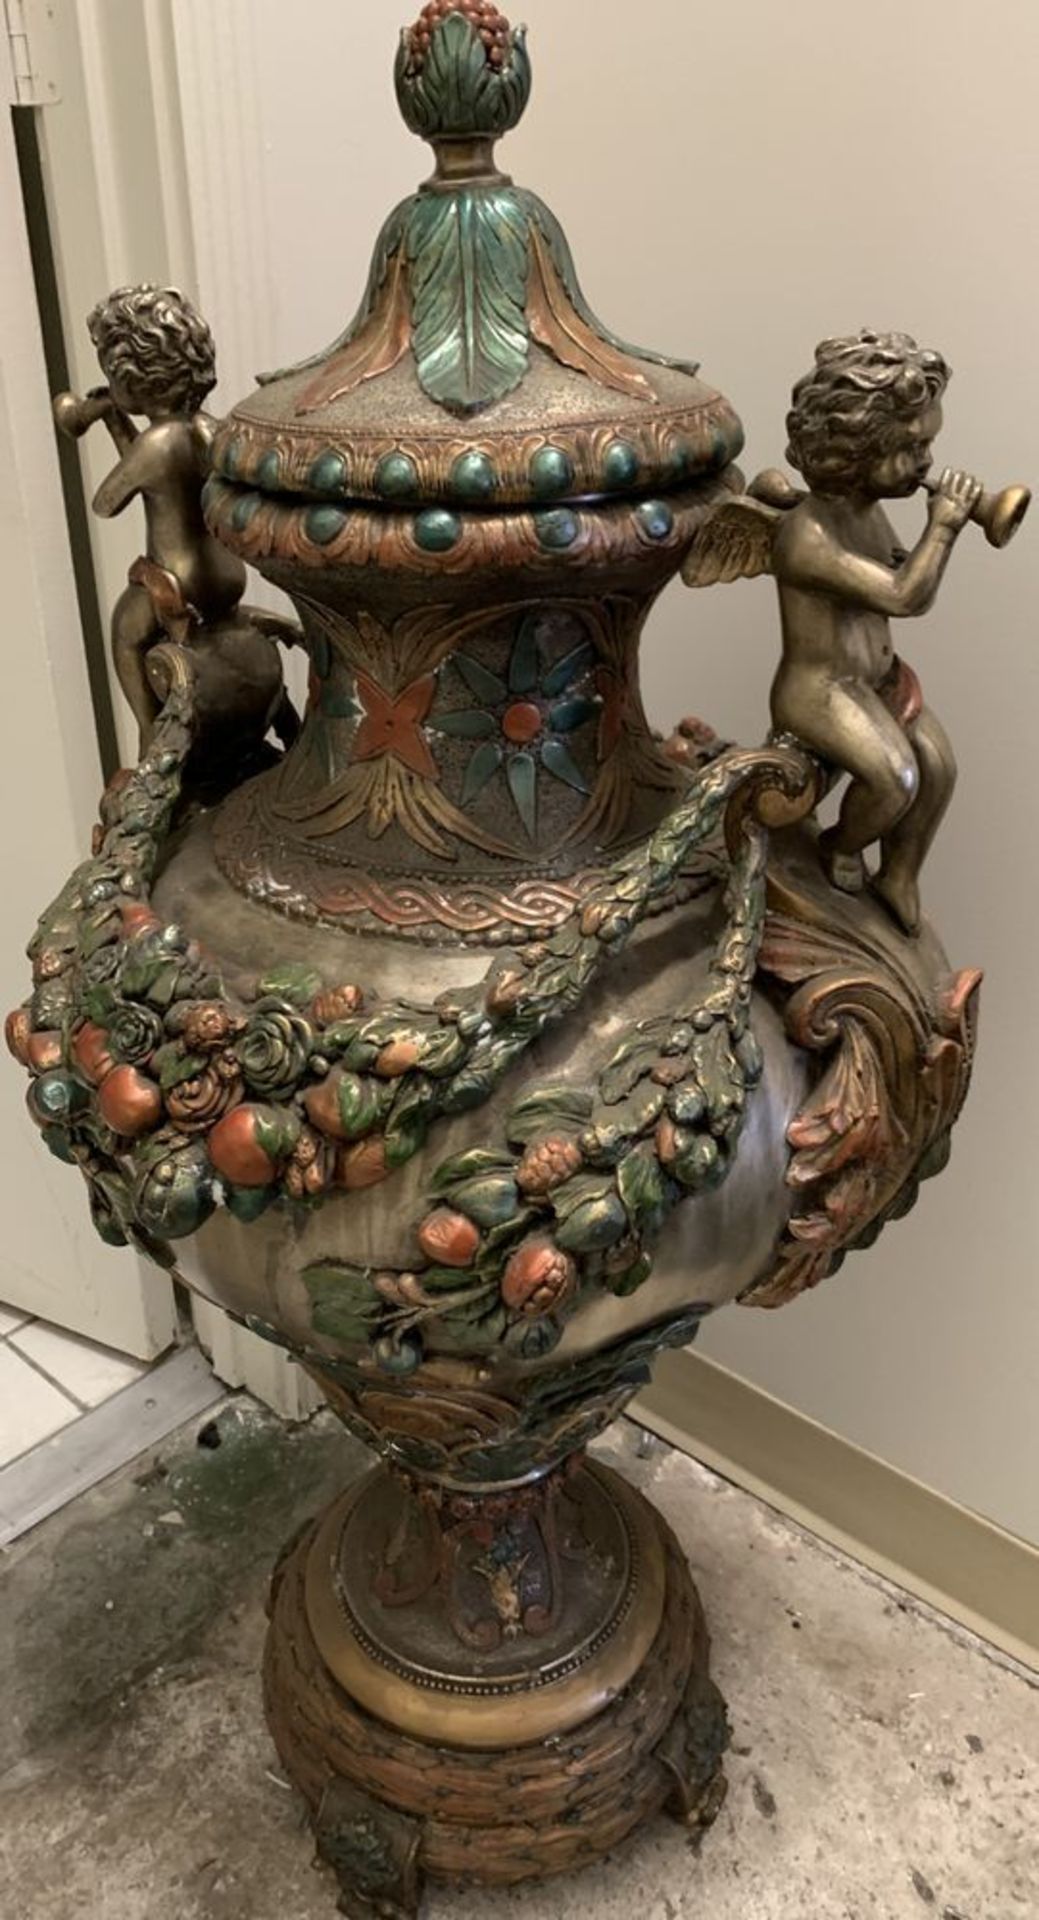 Bronze Vintage Urn Vase, Stands around 3.5' tall **If won, must be picked up in Chatsworth, CA.